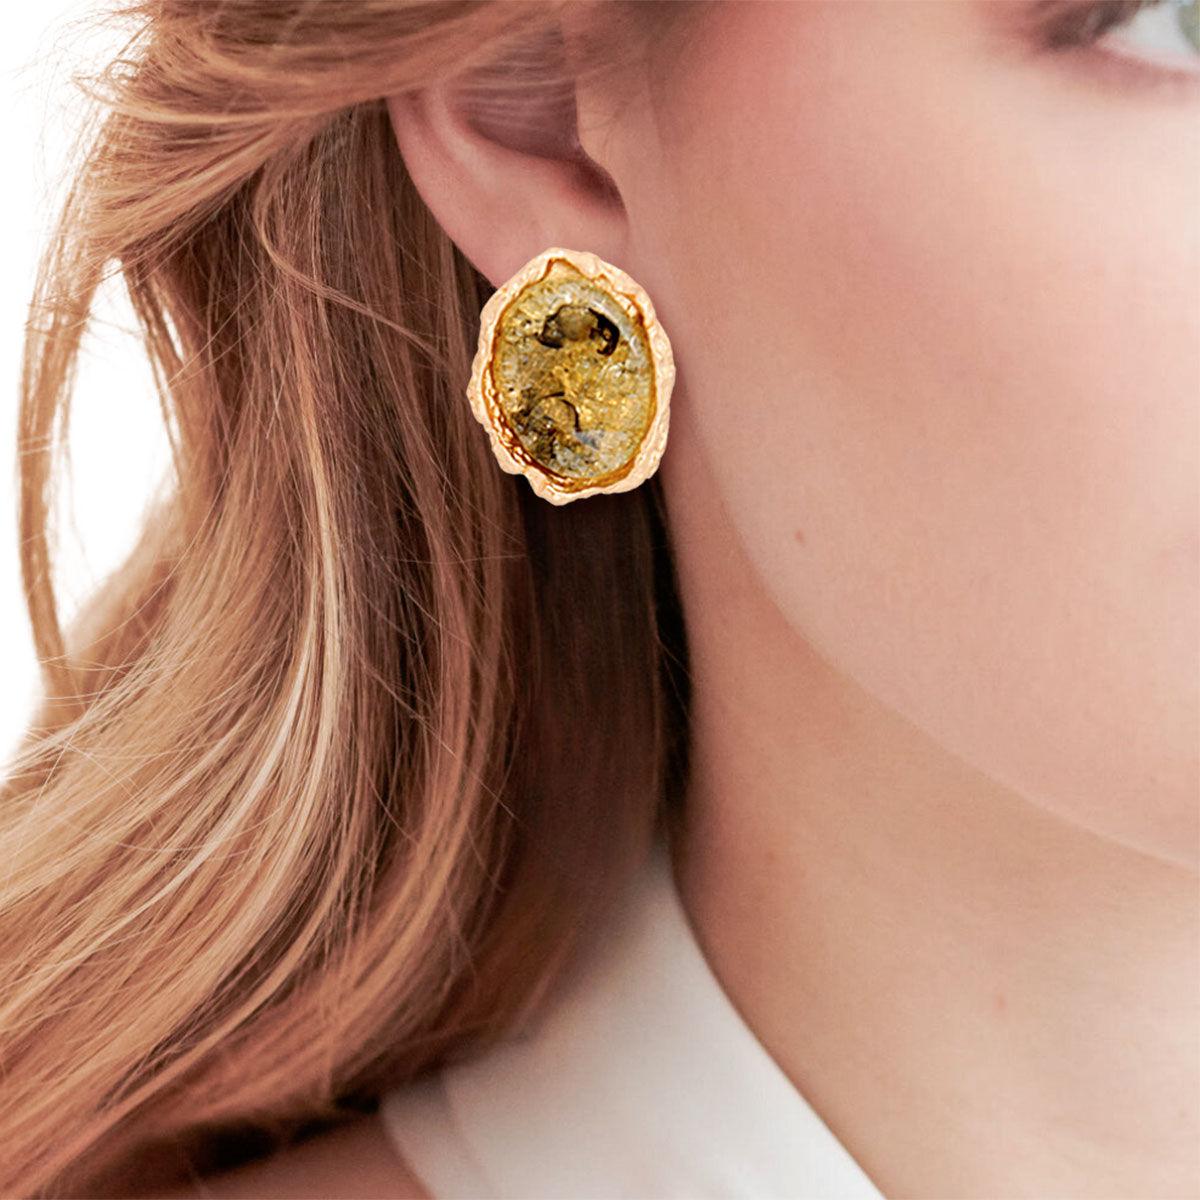 Shop Stylish Gold Tone Oval Studs: Textured Metal & Resin Accents